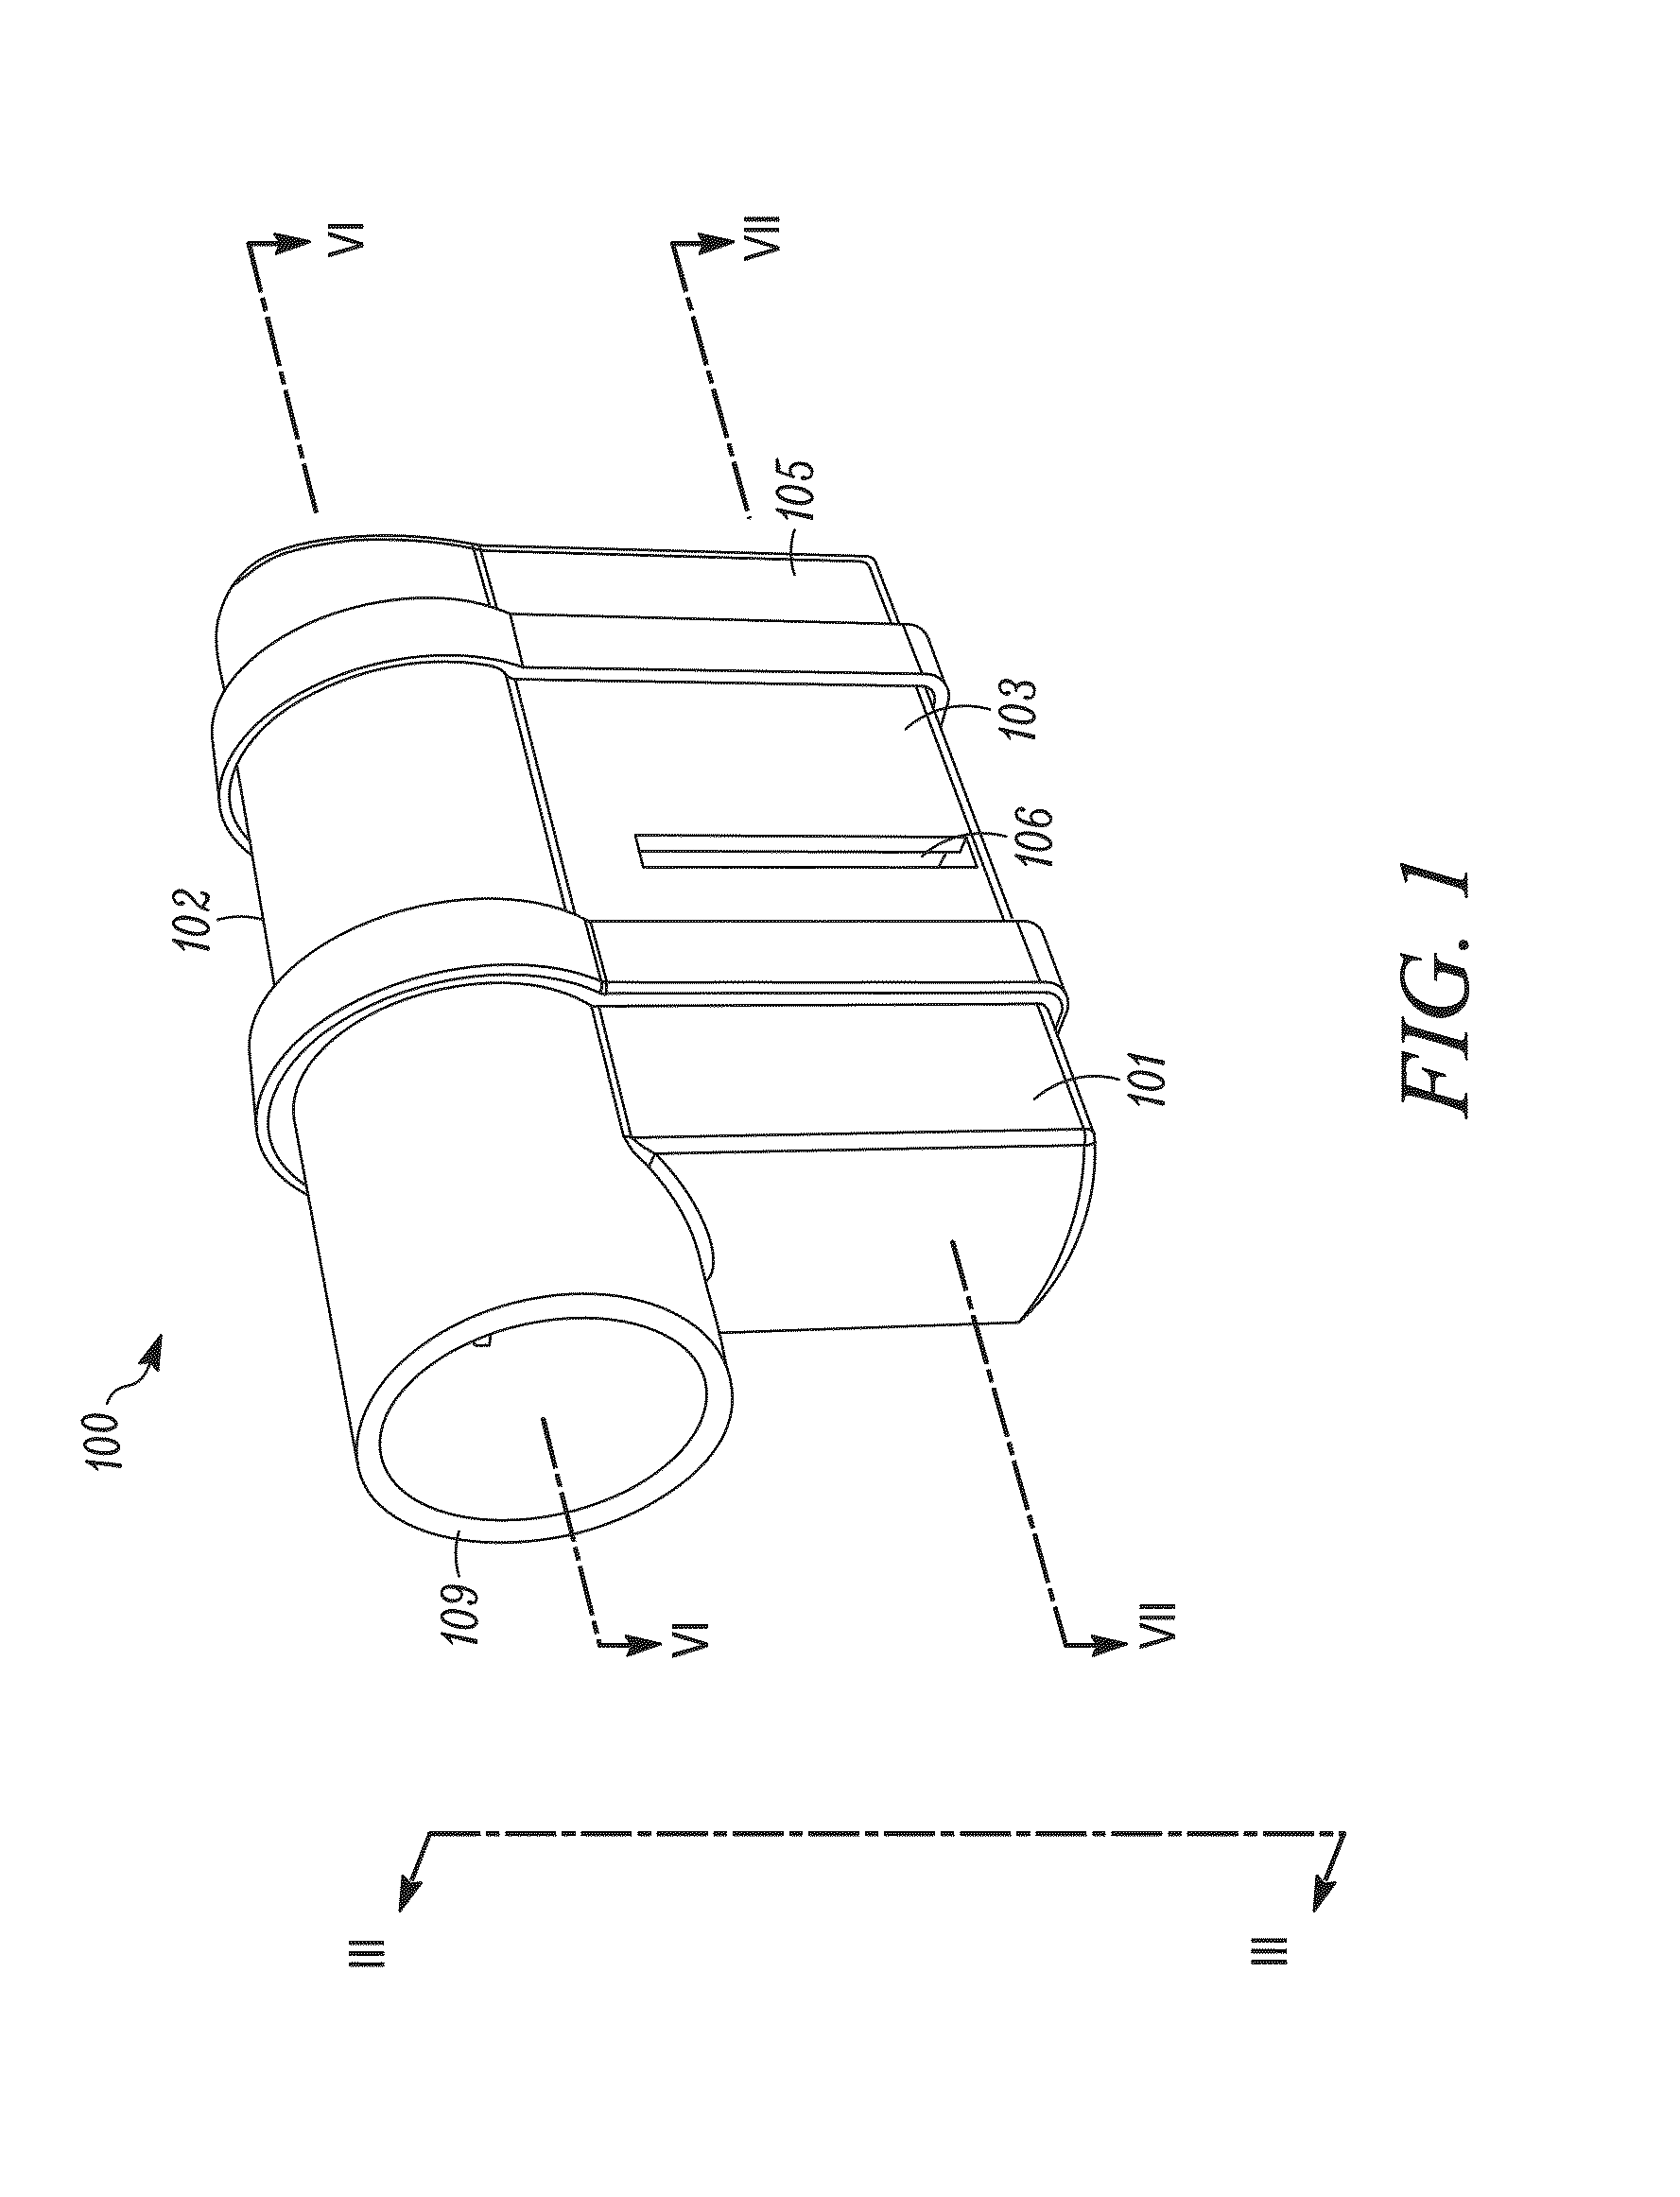 Pressure indicator for an oscillating positive expiratory pressure device